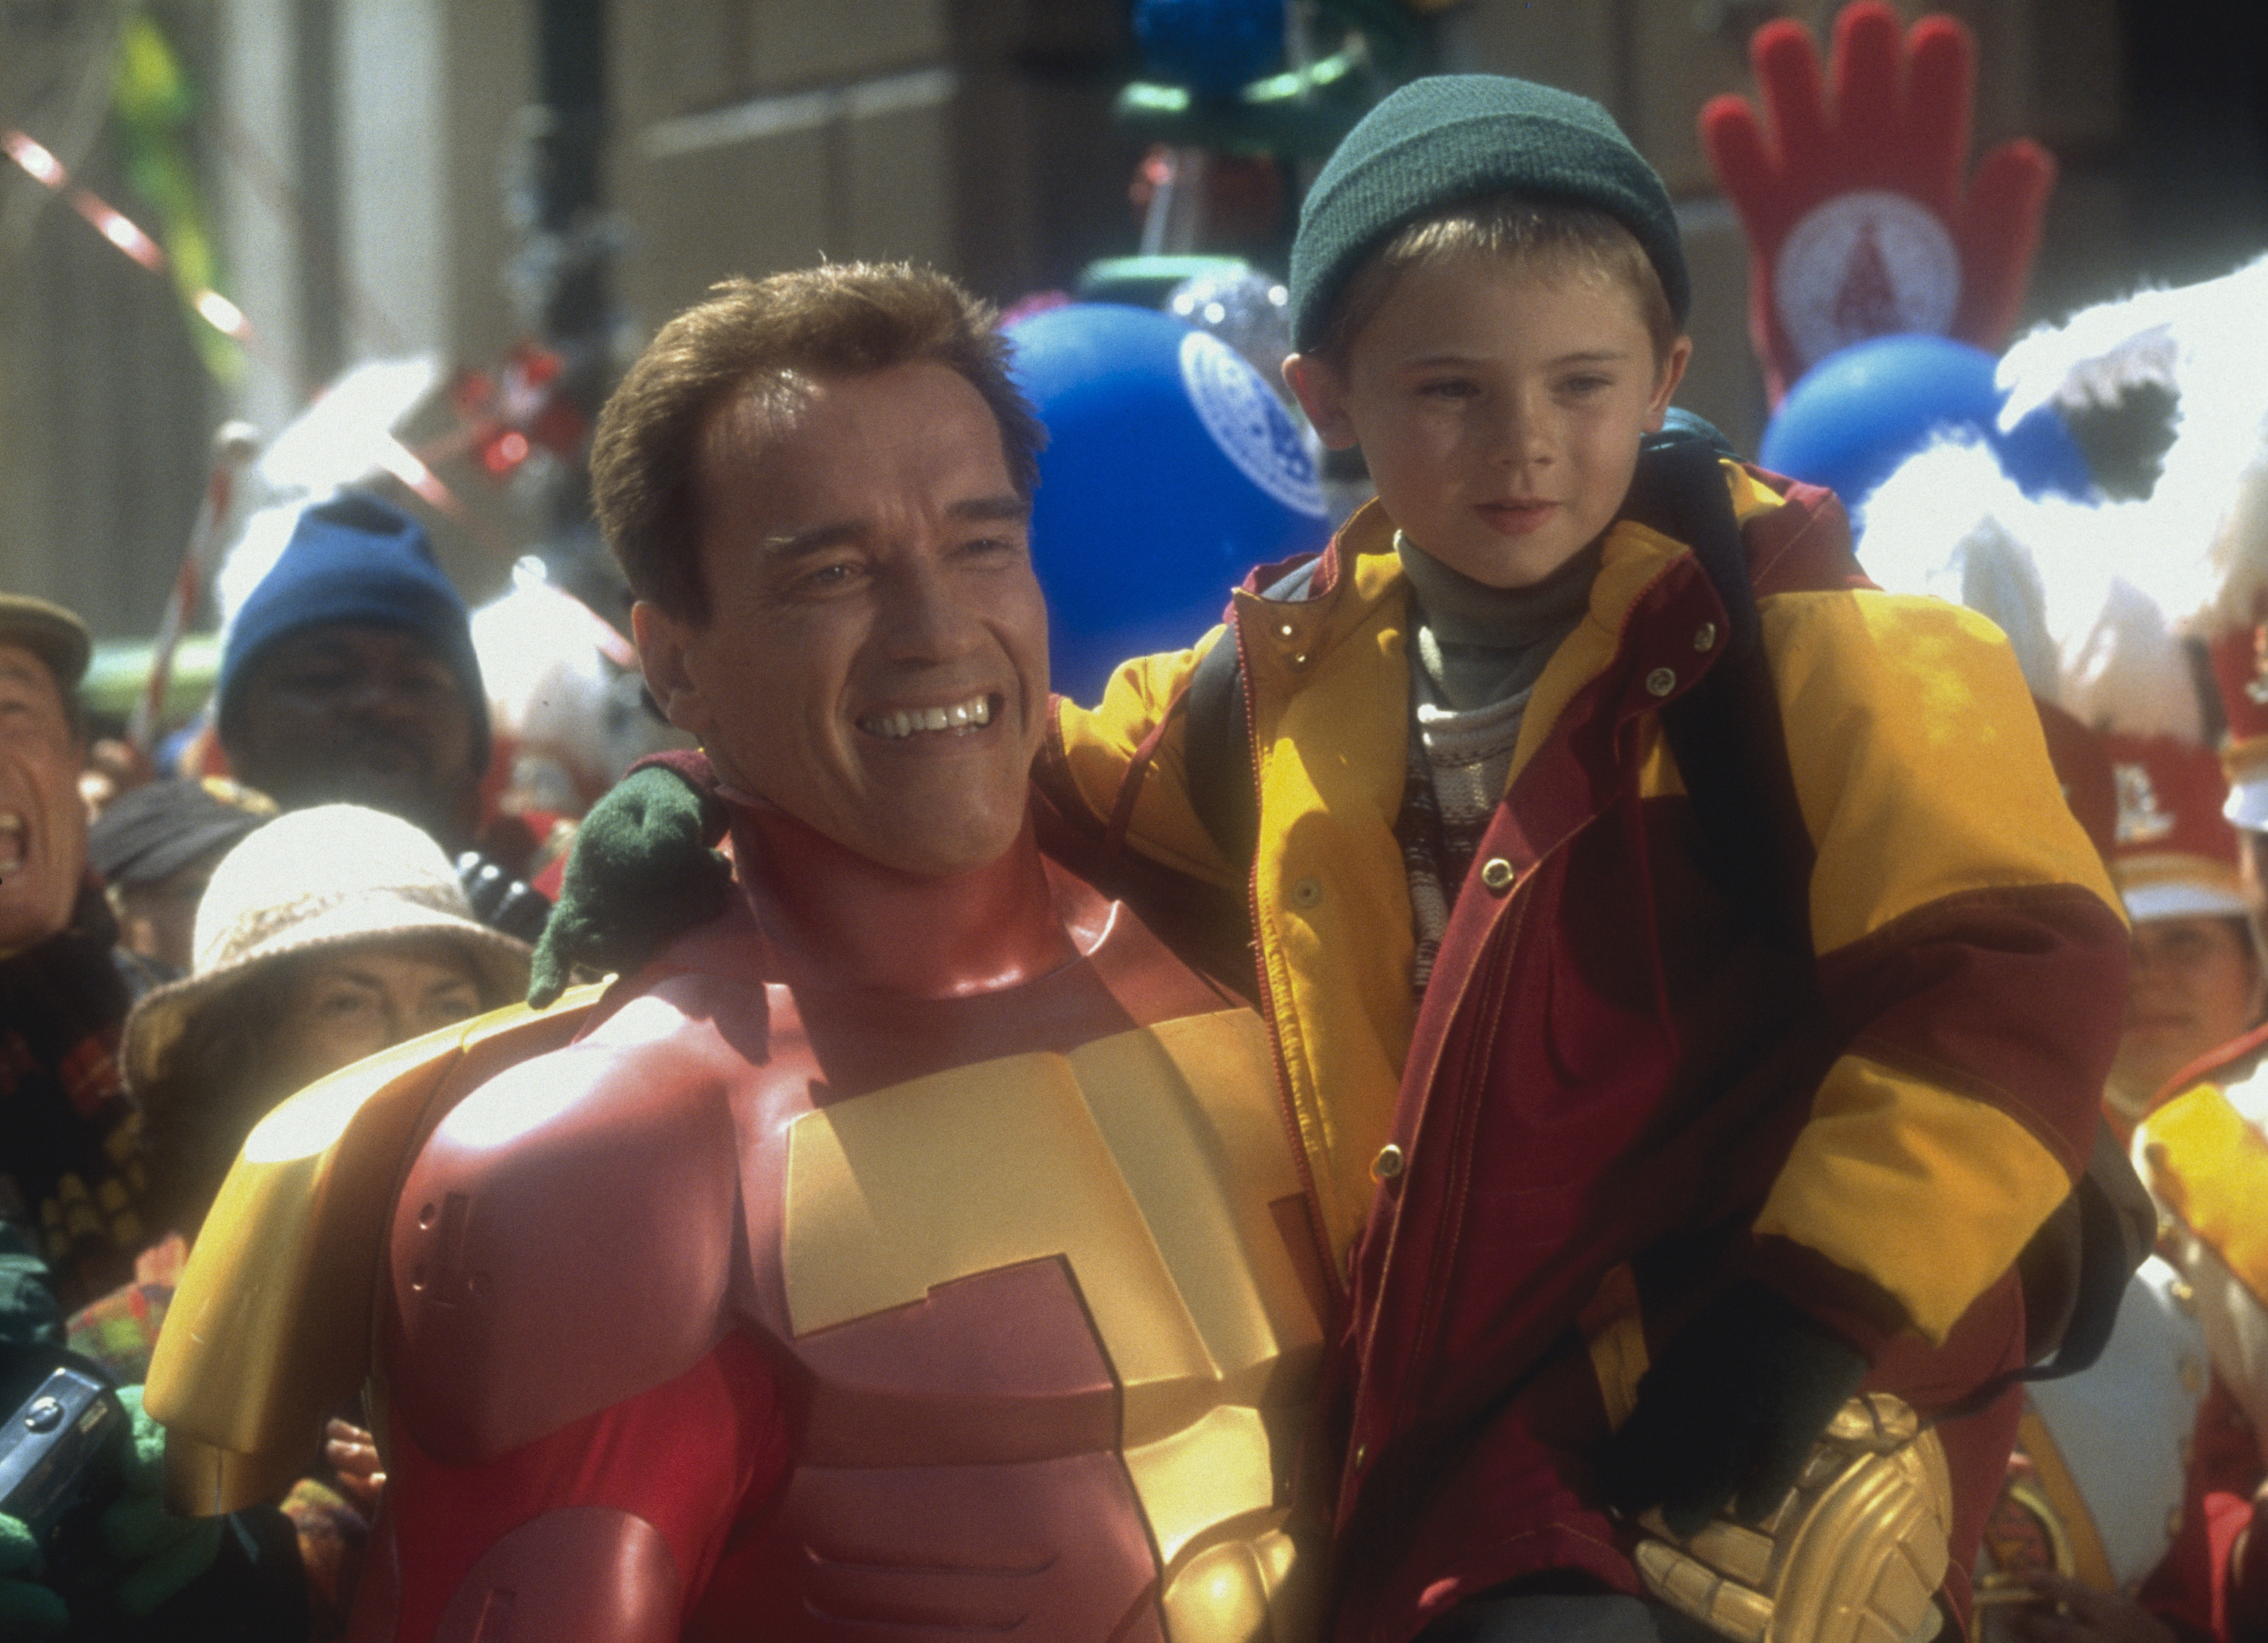 Actor Arnold Schwarzenegger with American actor Jake Lloyd on the set of the film "Jingle All the Way," circa January 1996 | Source: Getty Images